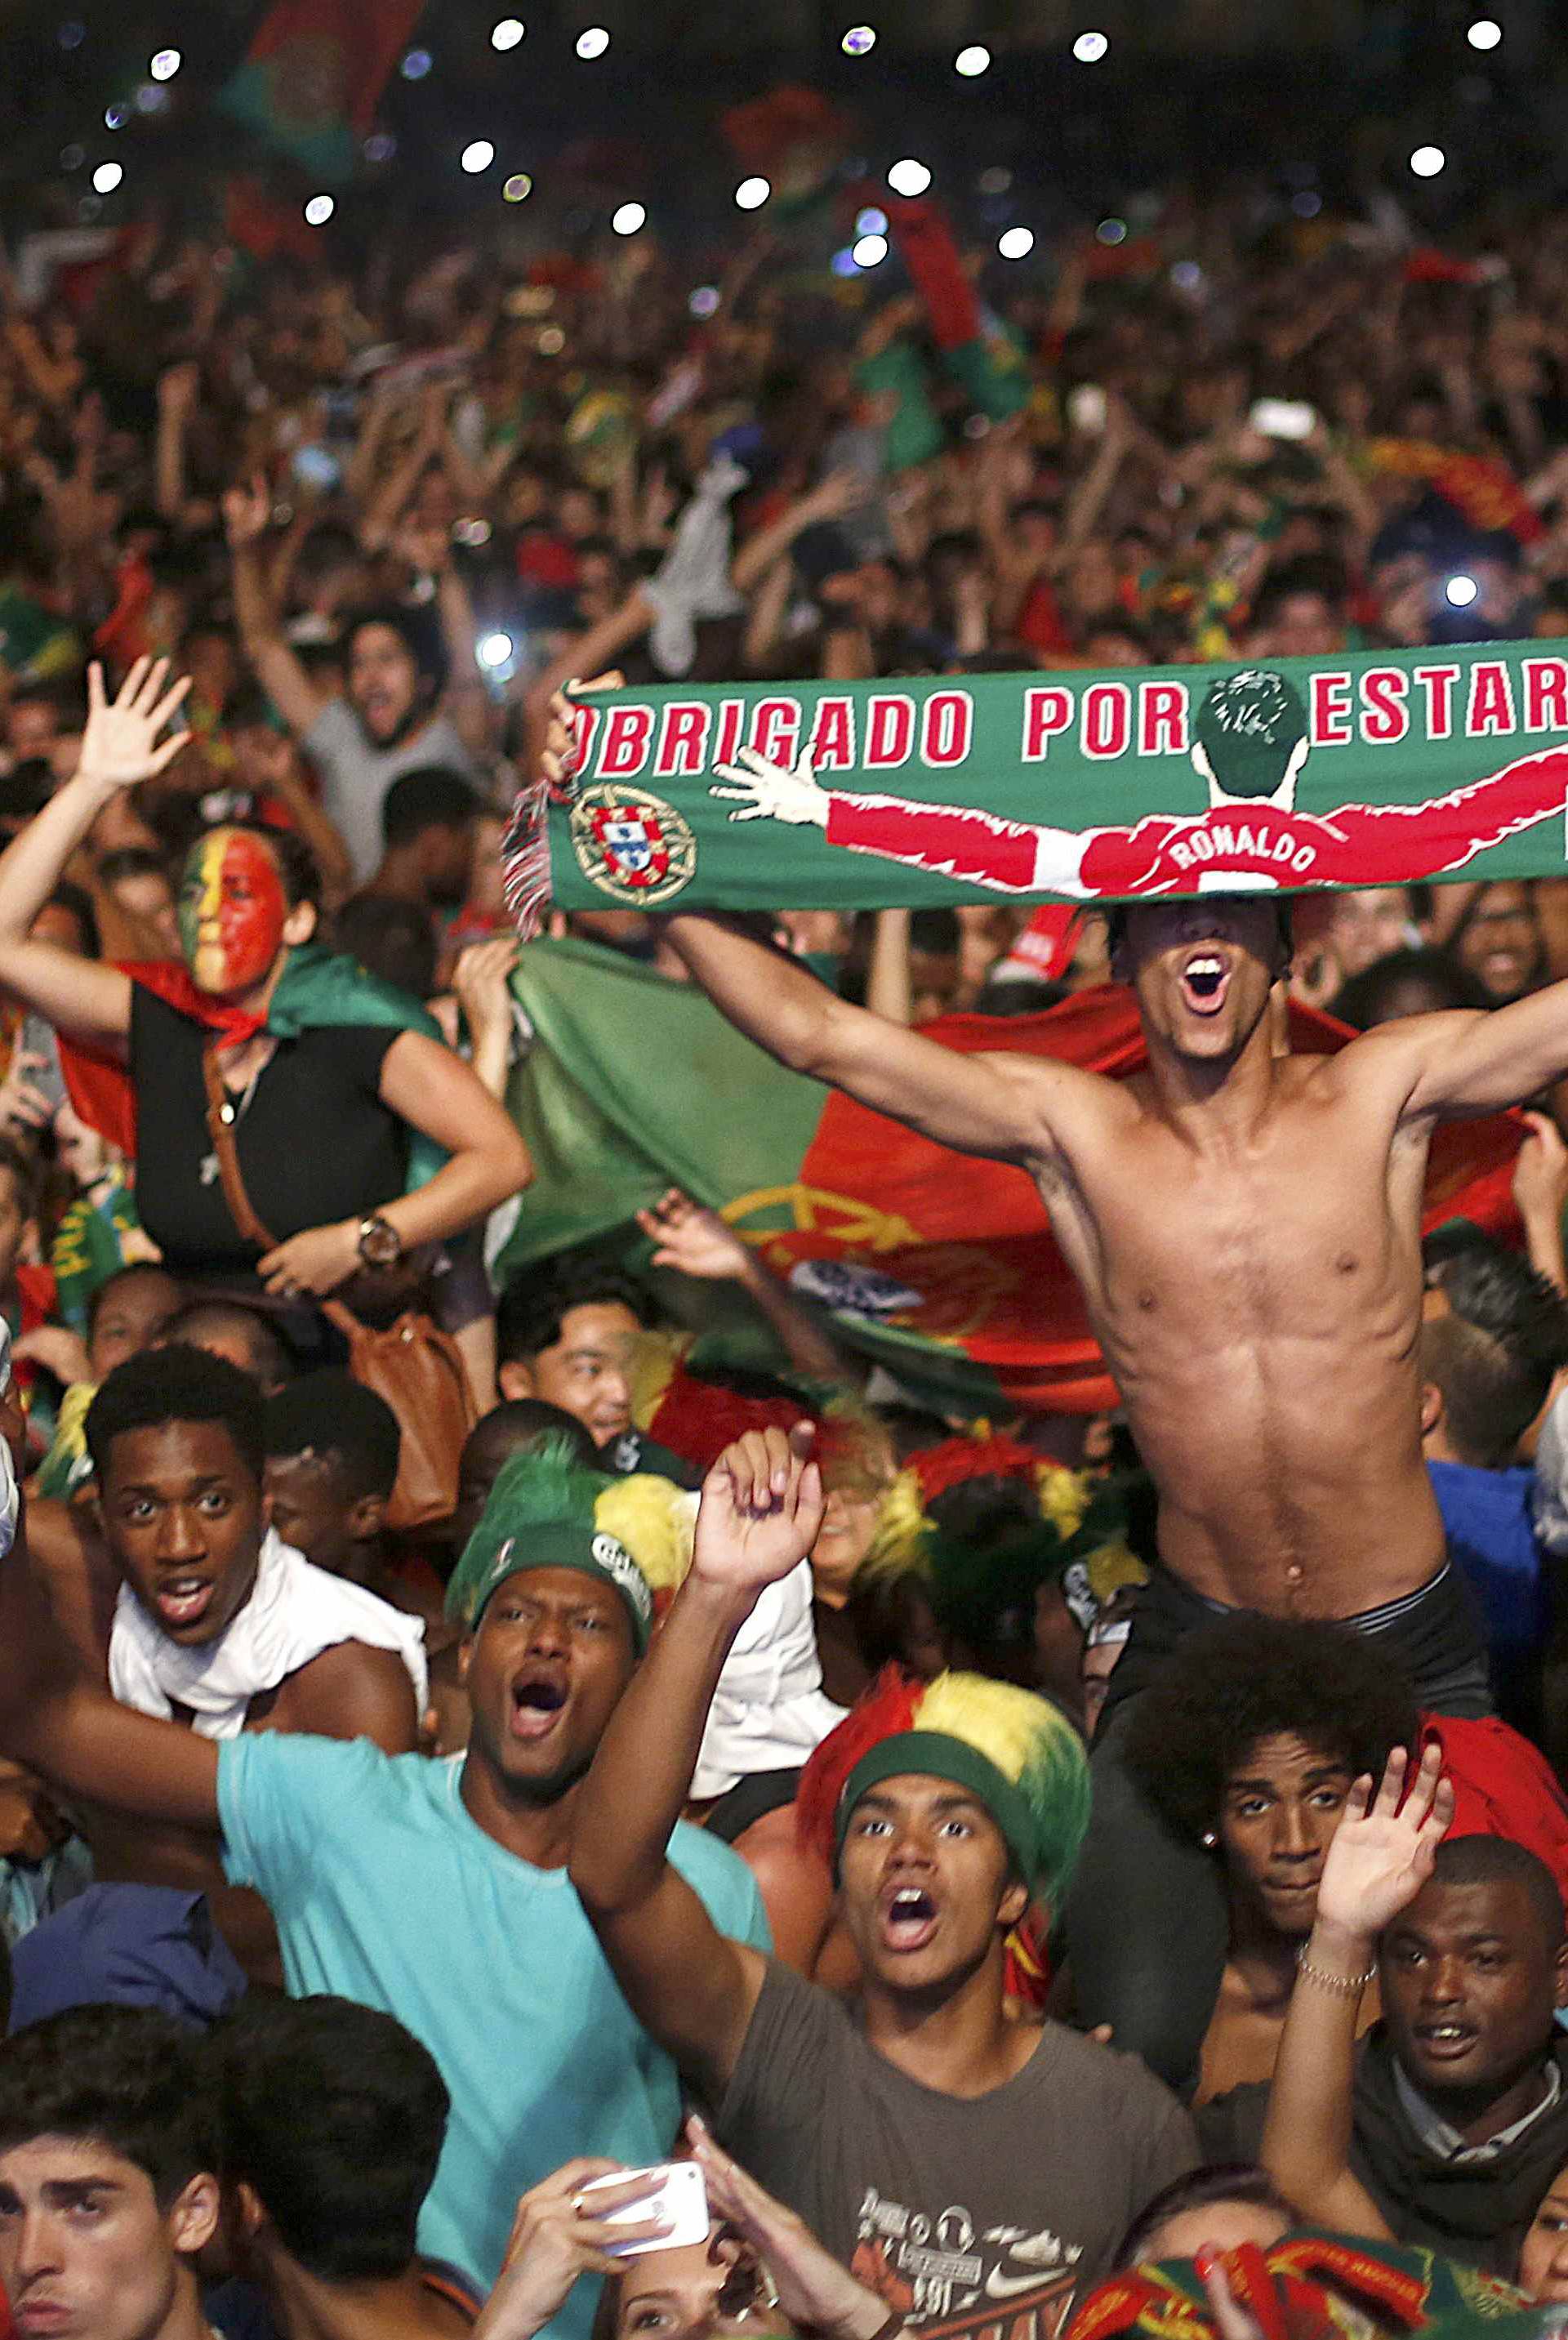 Fans of Portugal react as they watch the Euro 2016 final between Portugal and France at a public screening in Lisbon